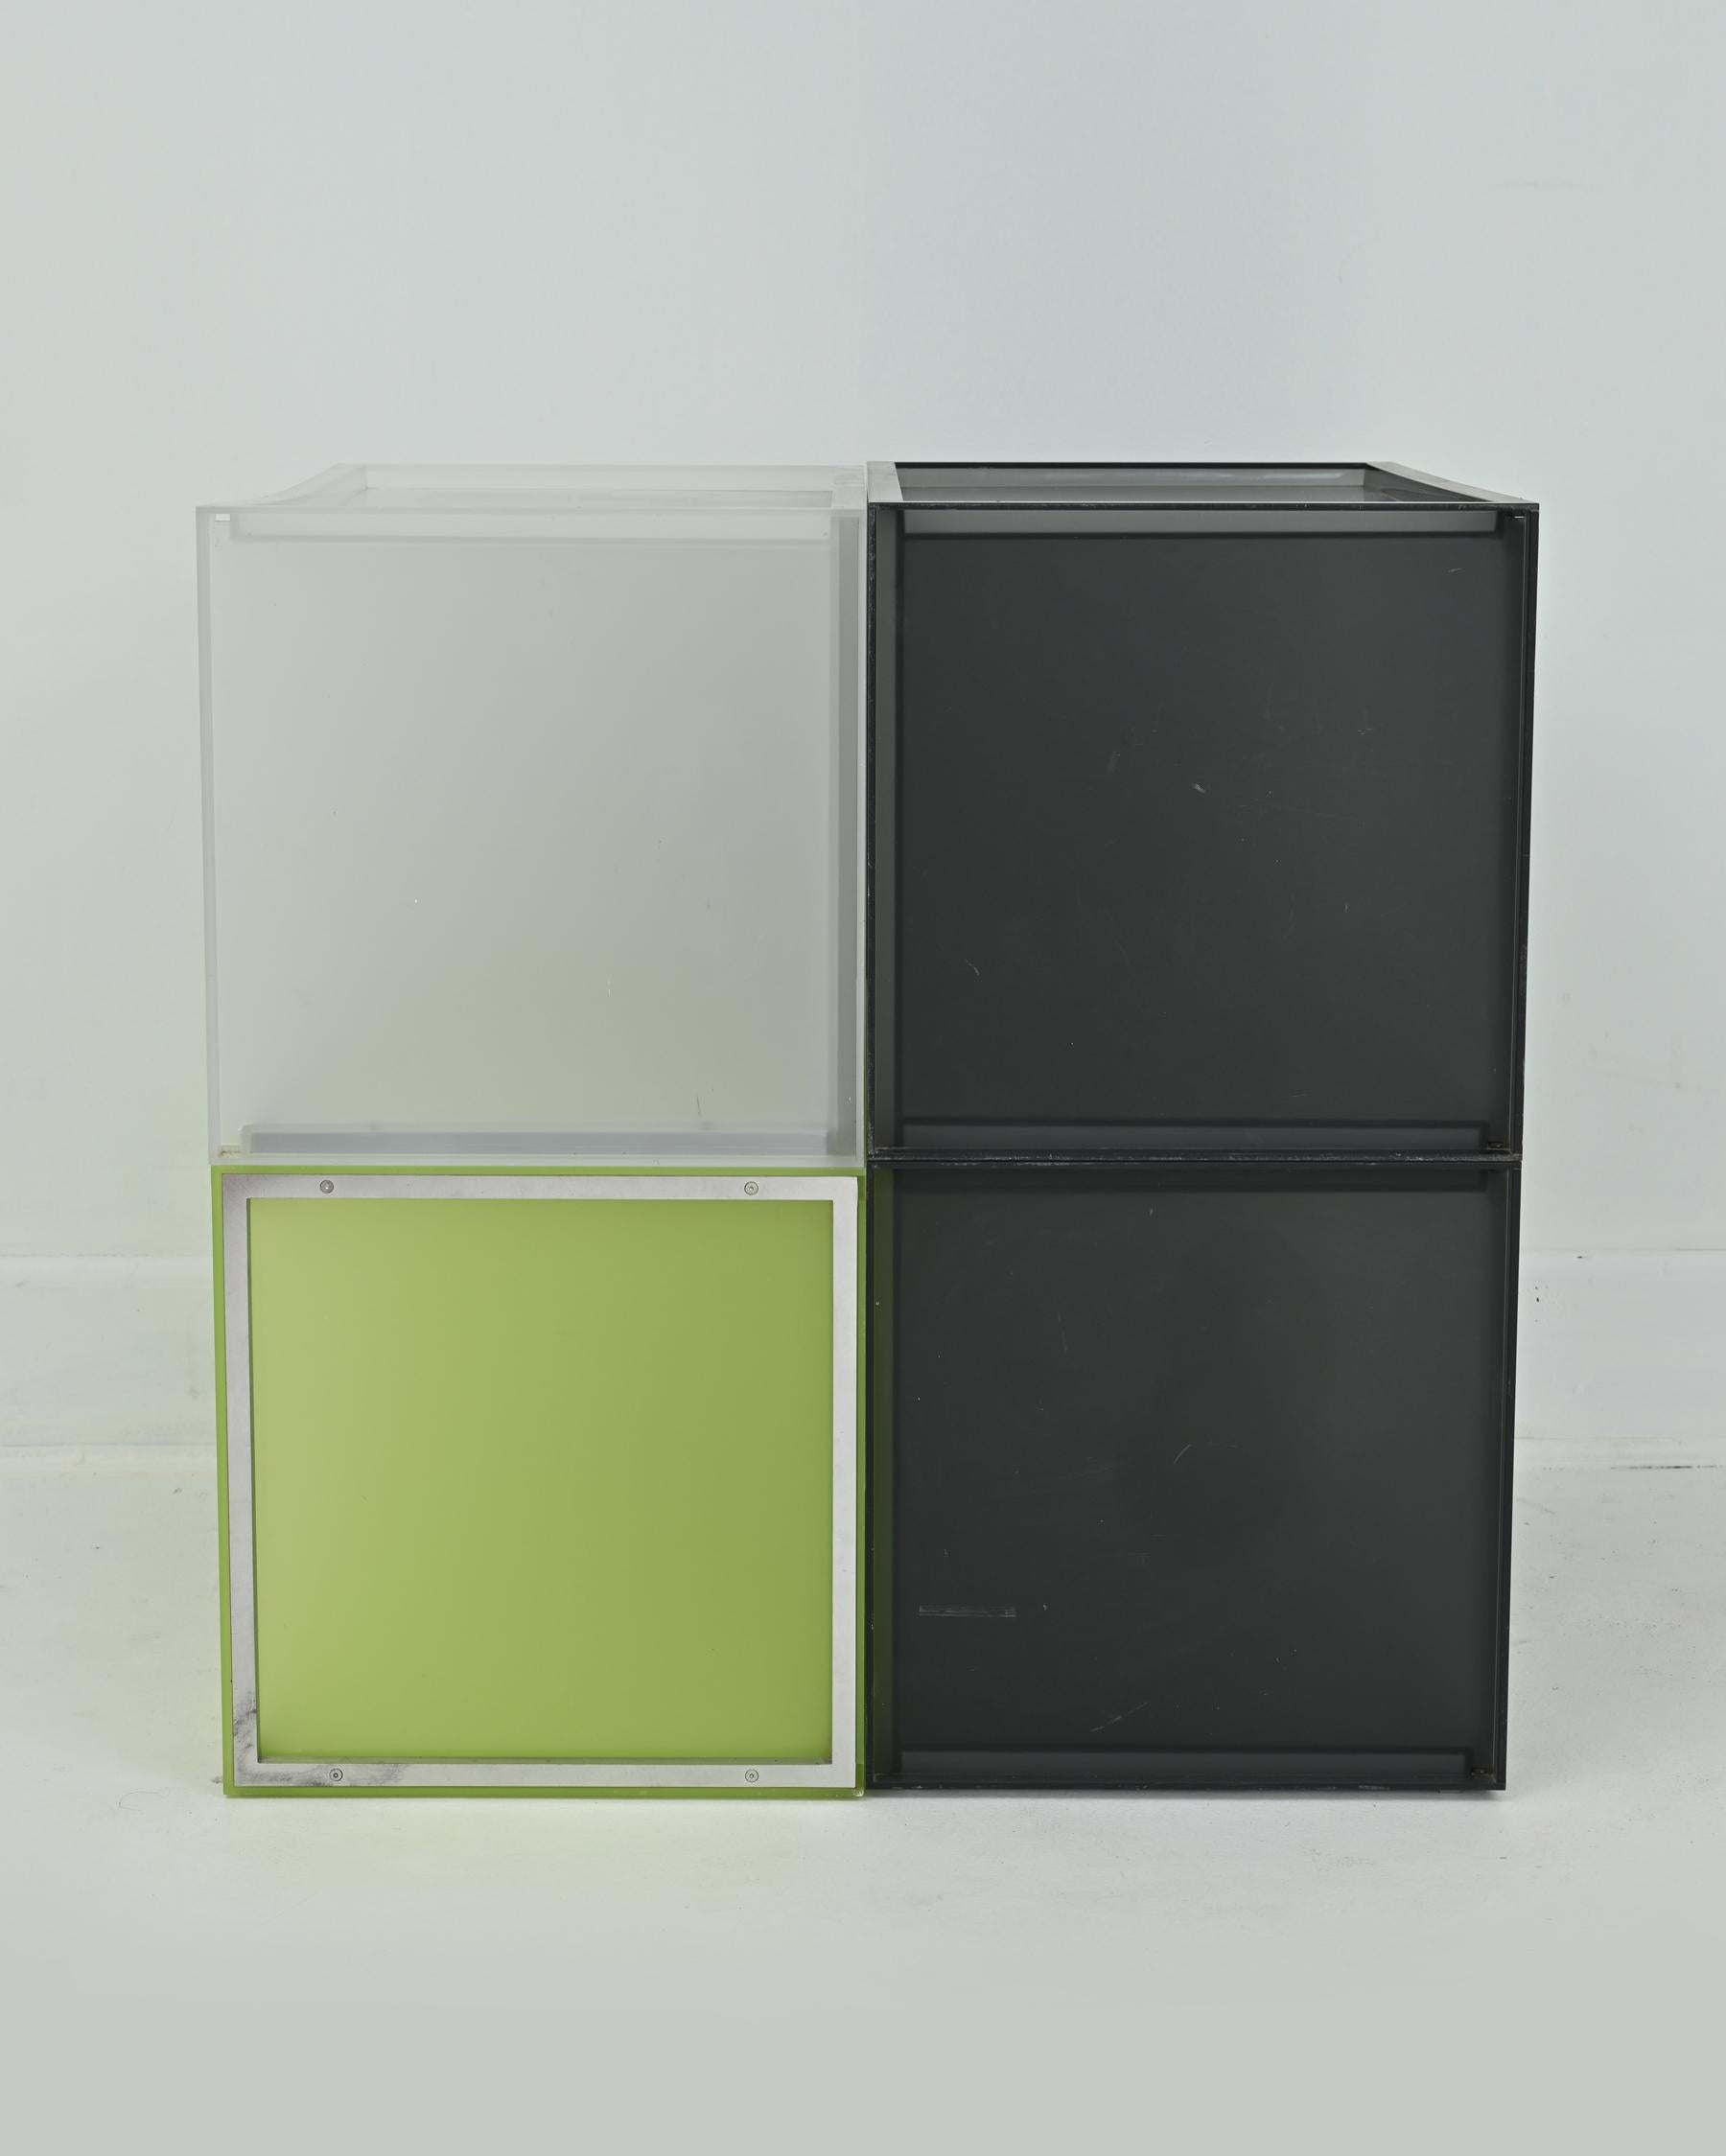 Metal 1990s Acrylic Resin and Steel “One” Wall Unit by Piero Lissoni for Kartell For Sale